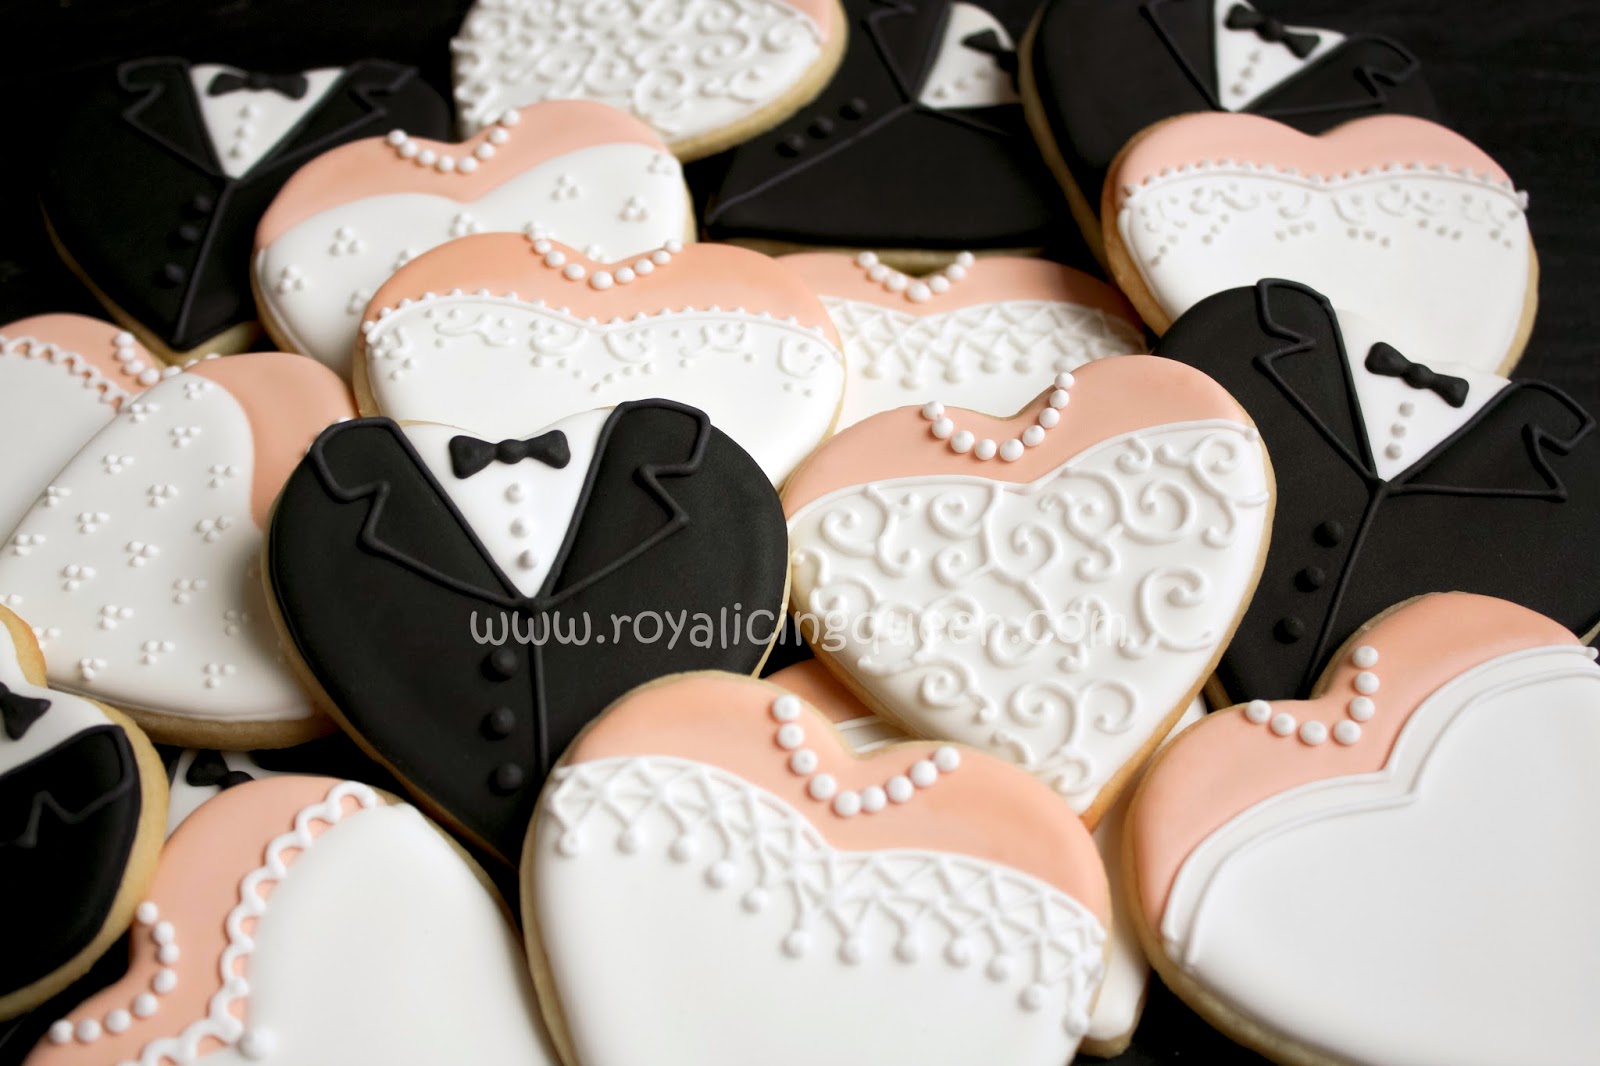 The Royal Icing Queen Bride And Groom Heart Cookies